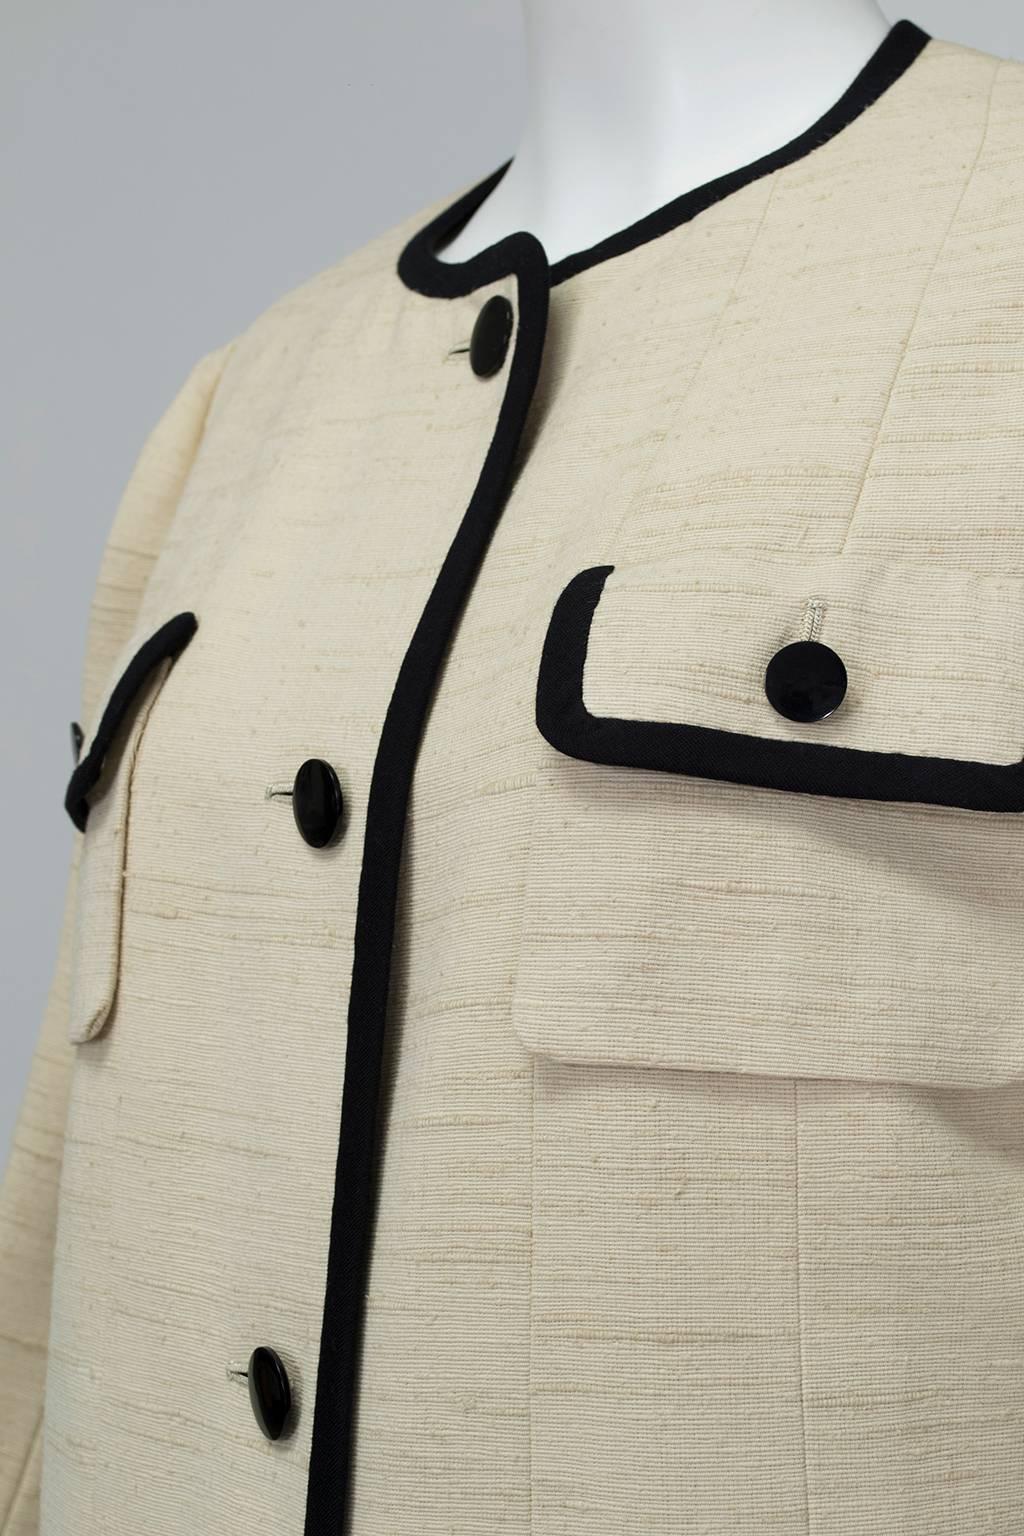 Traina-Norell Mod Ivory ¾ Coat with Contrast Piping - Medium, 1950s In Good Condition For Sale In Tucson, AZ